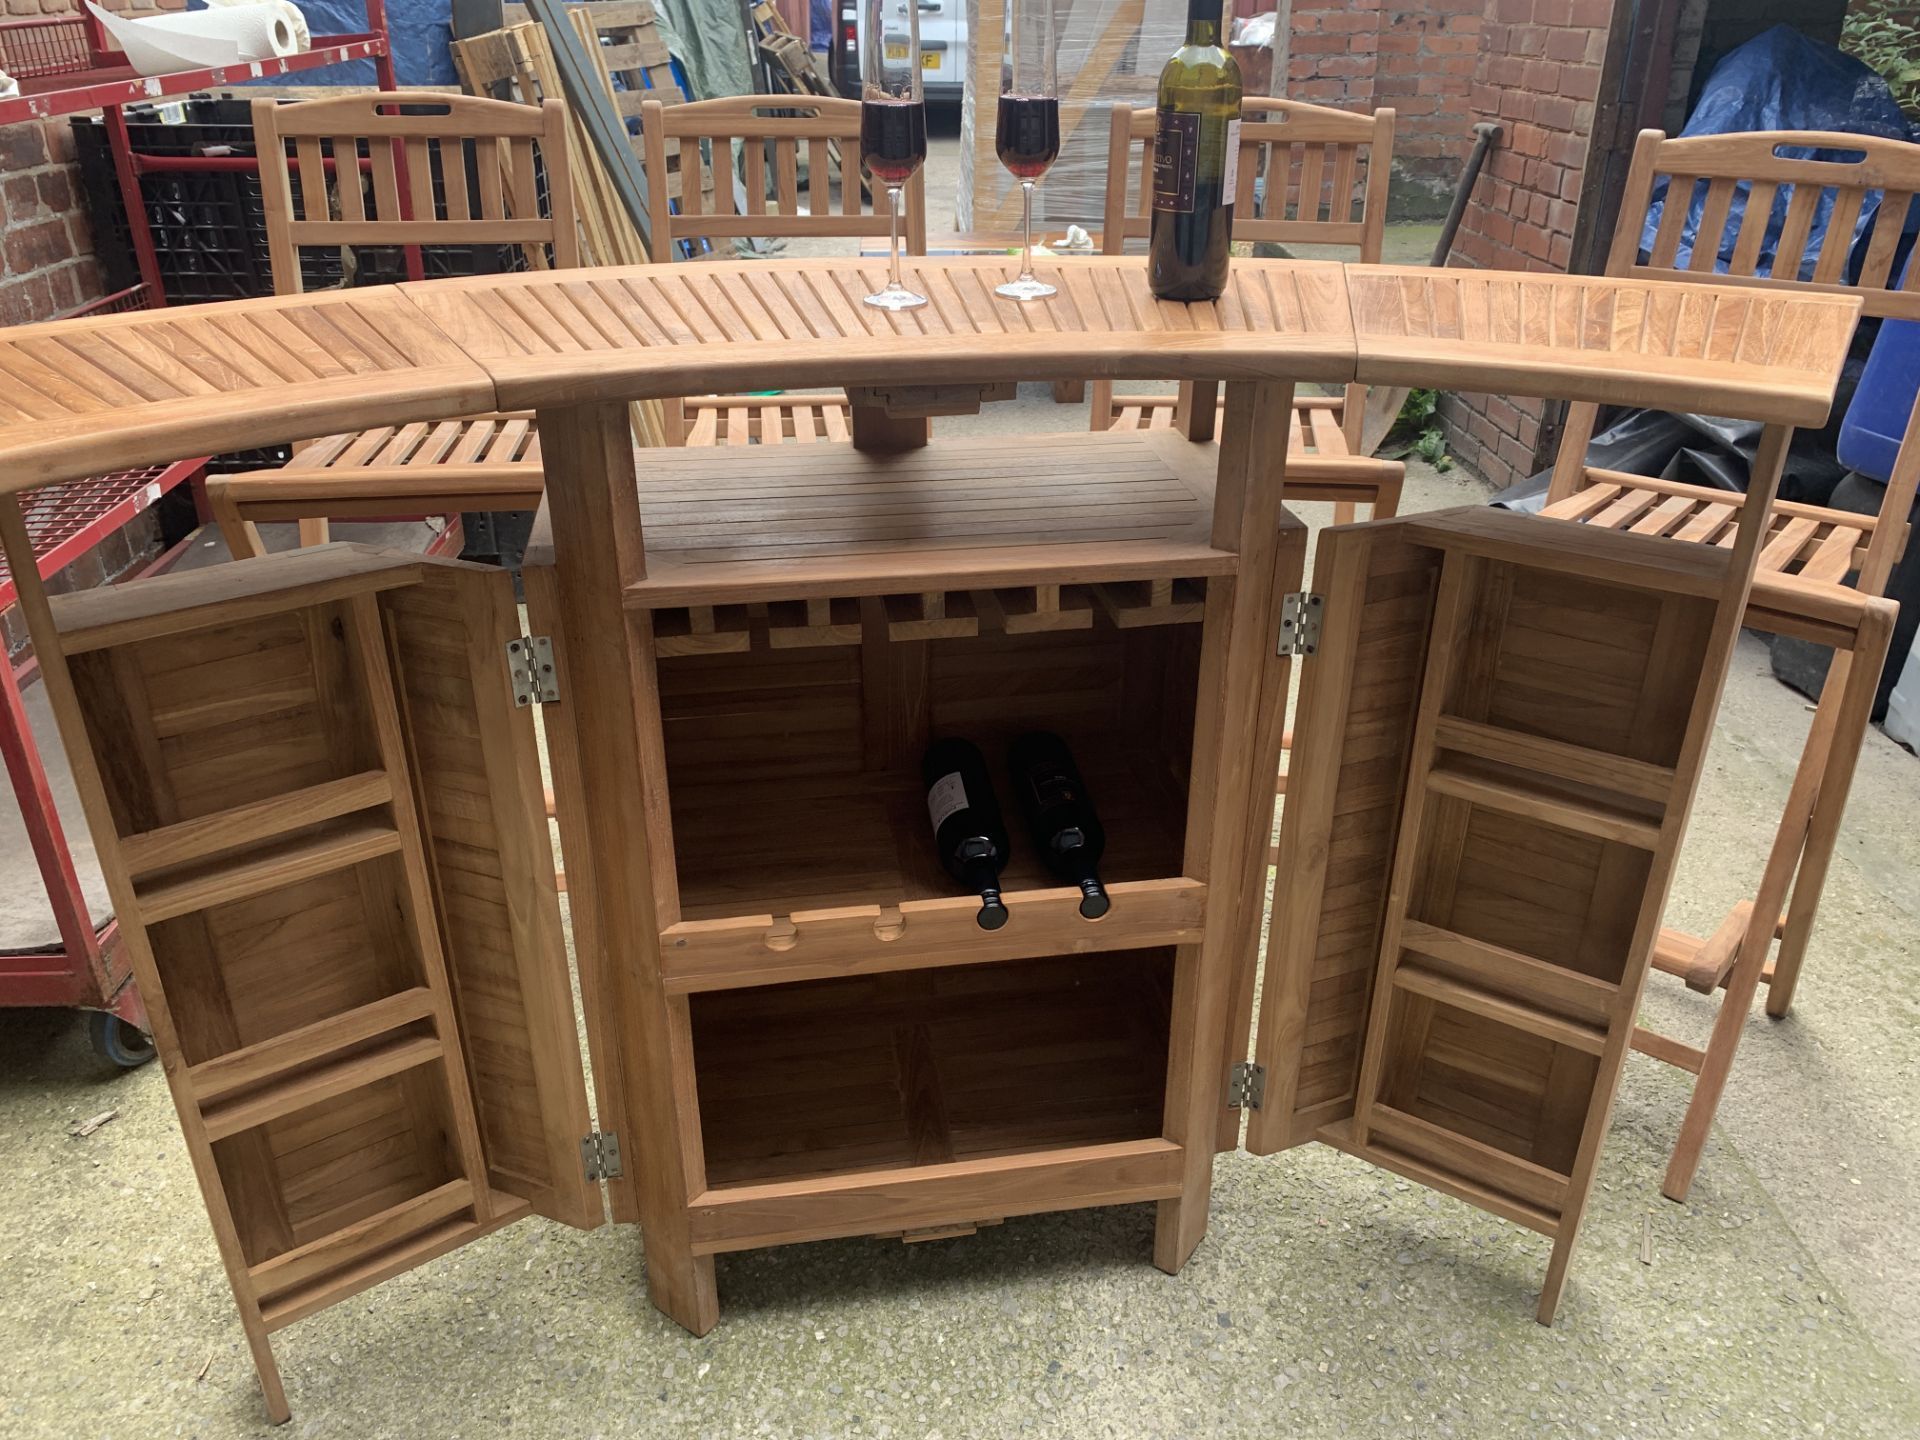 BRAND NEW SOLID WOODEN TEAK FOLDING BAR SET WITH 4 STOOLS 176 X 40 X 108 RRP £2995 - Image 7 of 7